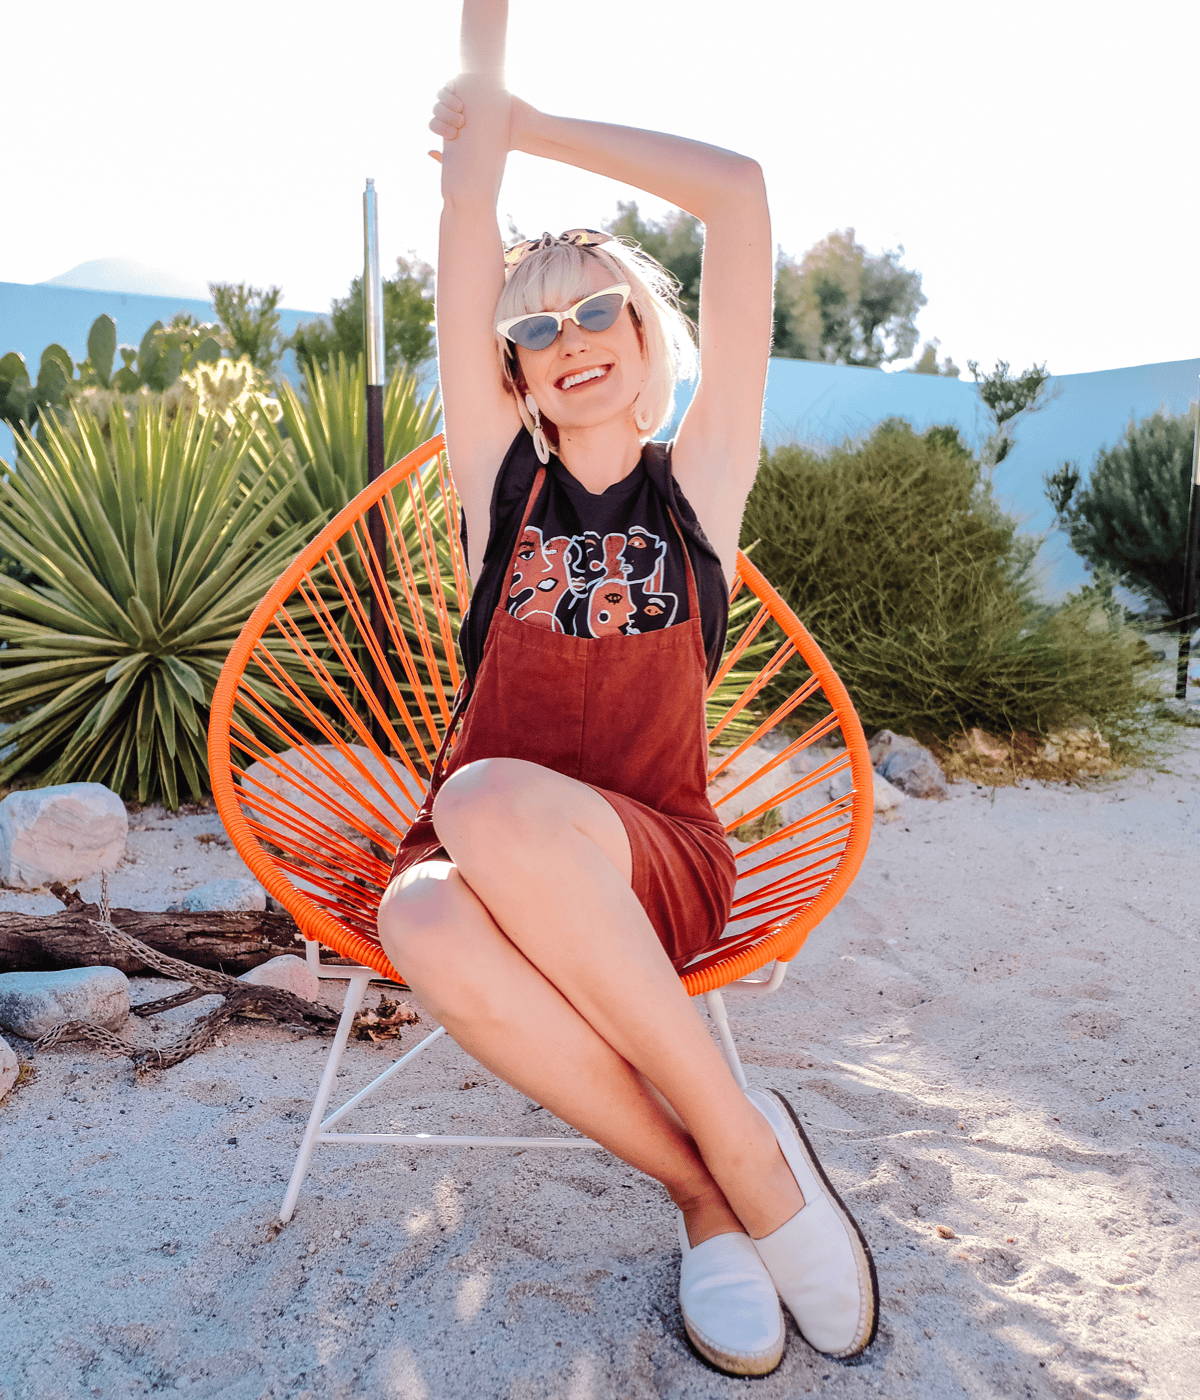 Dani Dazey on smiles with hands raised while sitting onboxhill's Acapulco lounge chair.